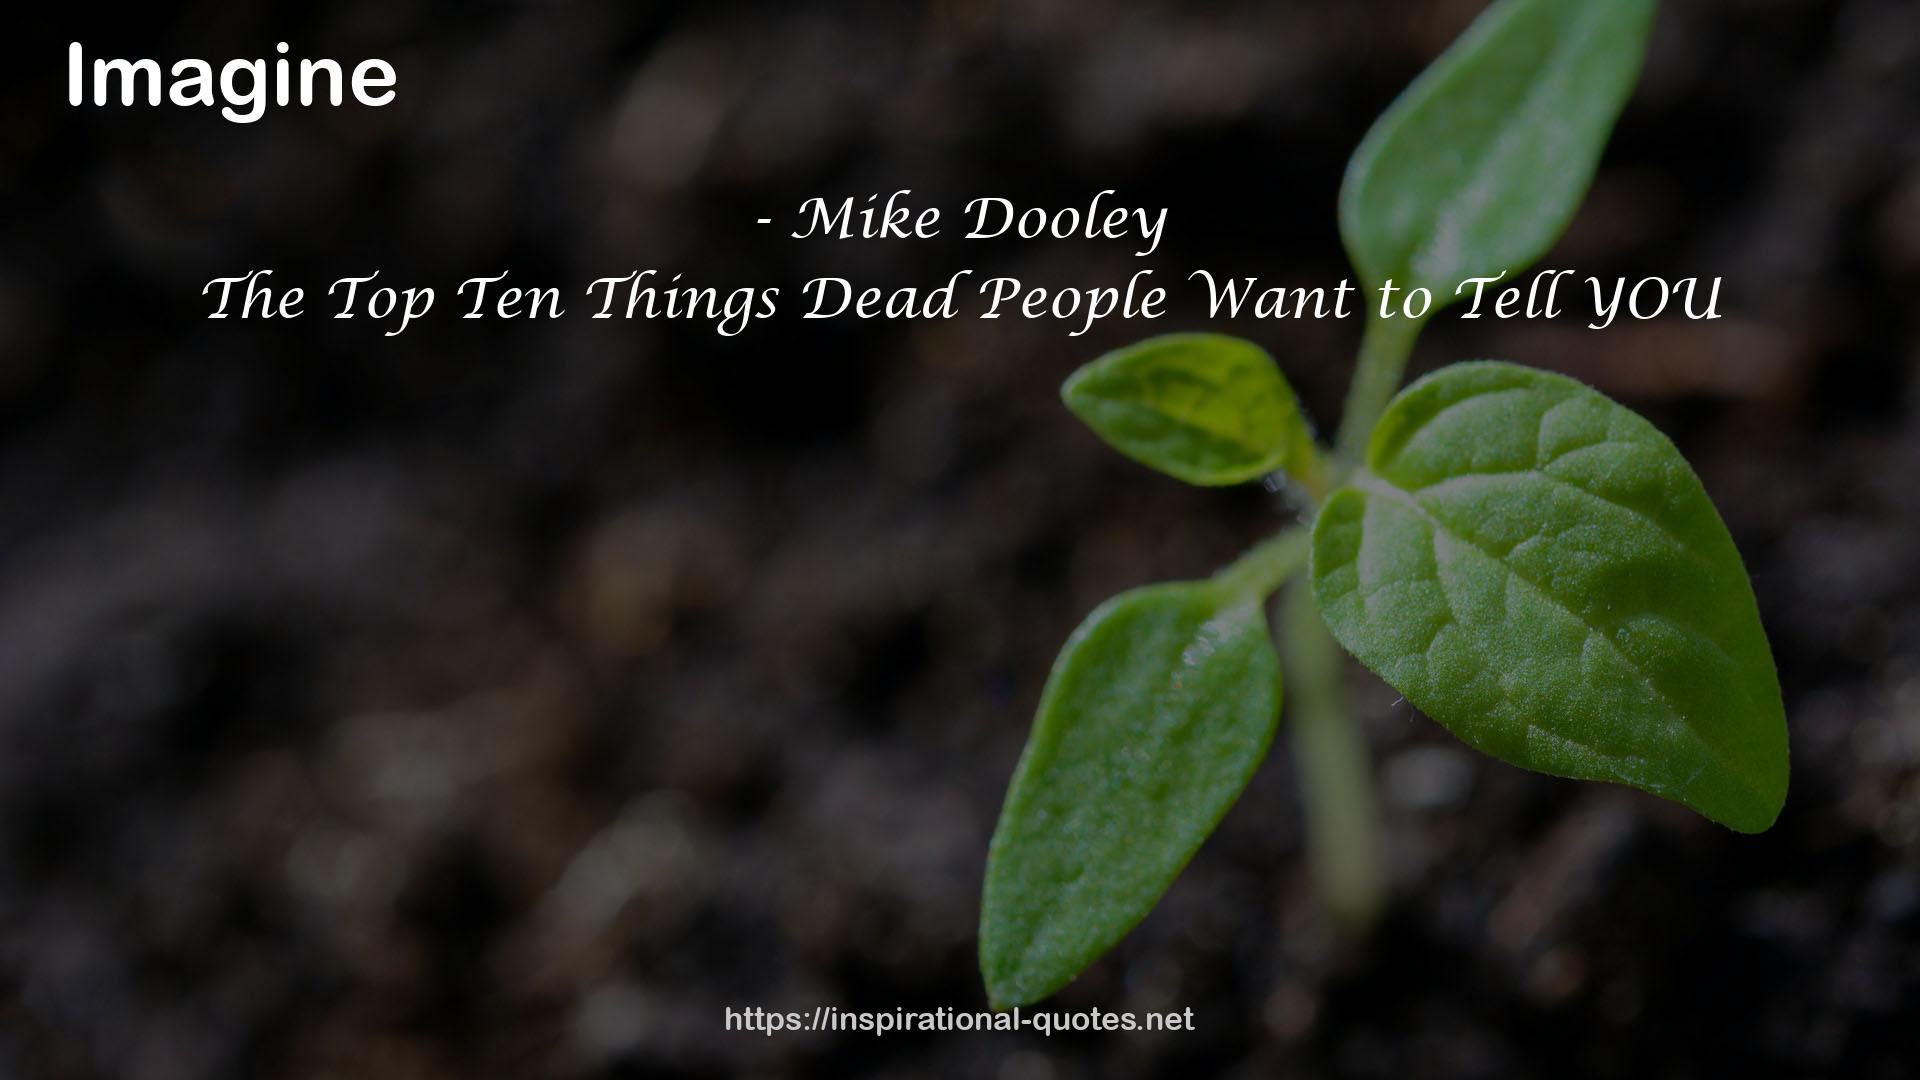 The Top Ten Things Dead People Want to Tell YOU QUOTES